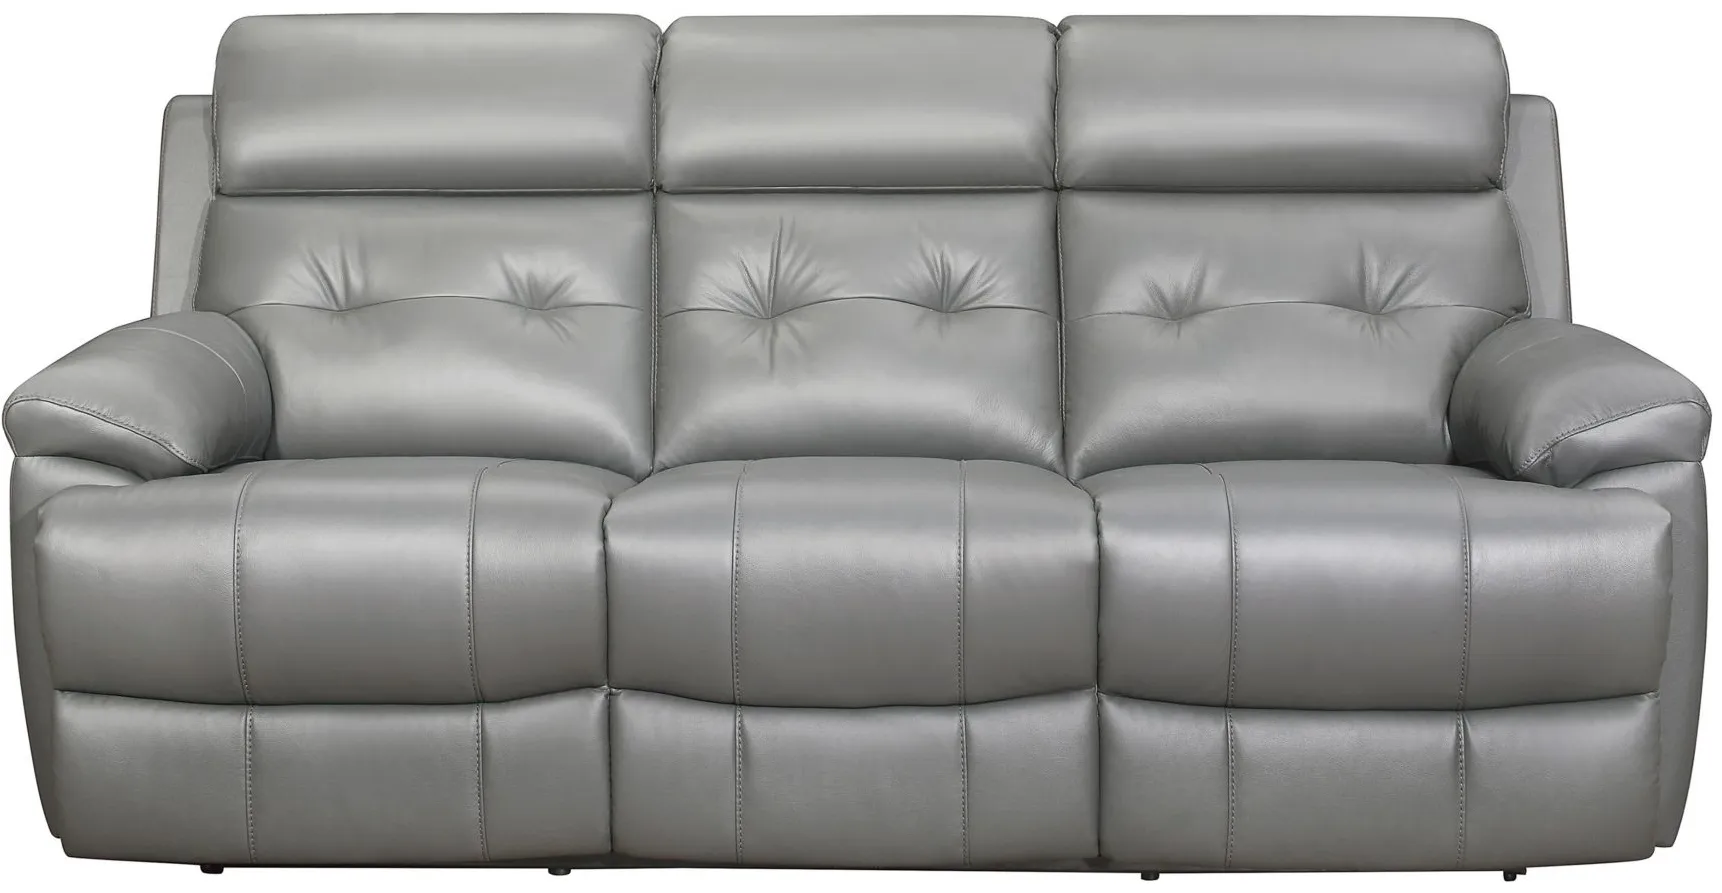 Wallstone Leather Double Reclining Sofa in Gray by Homelegance